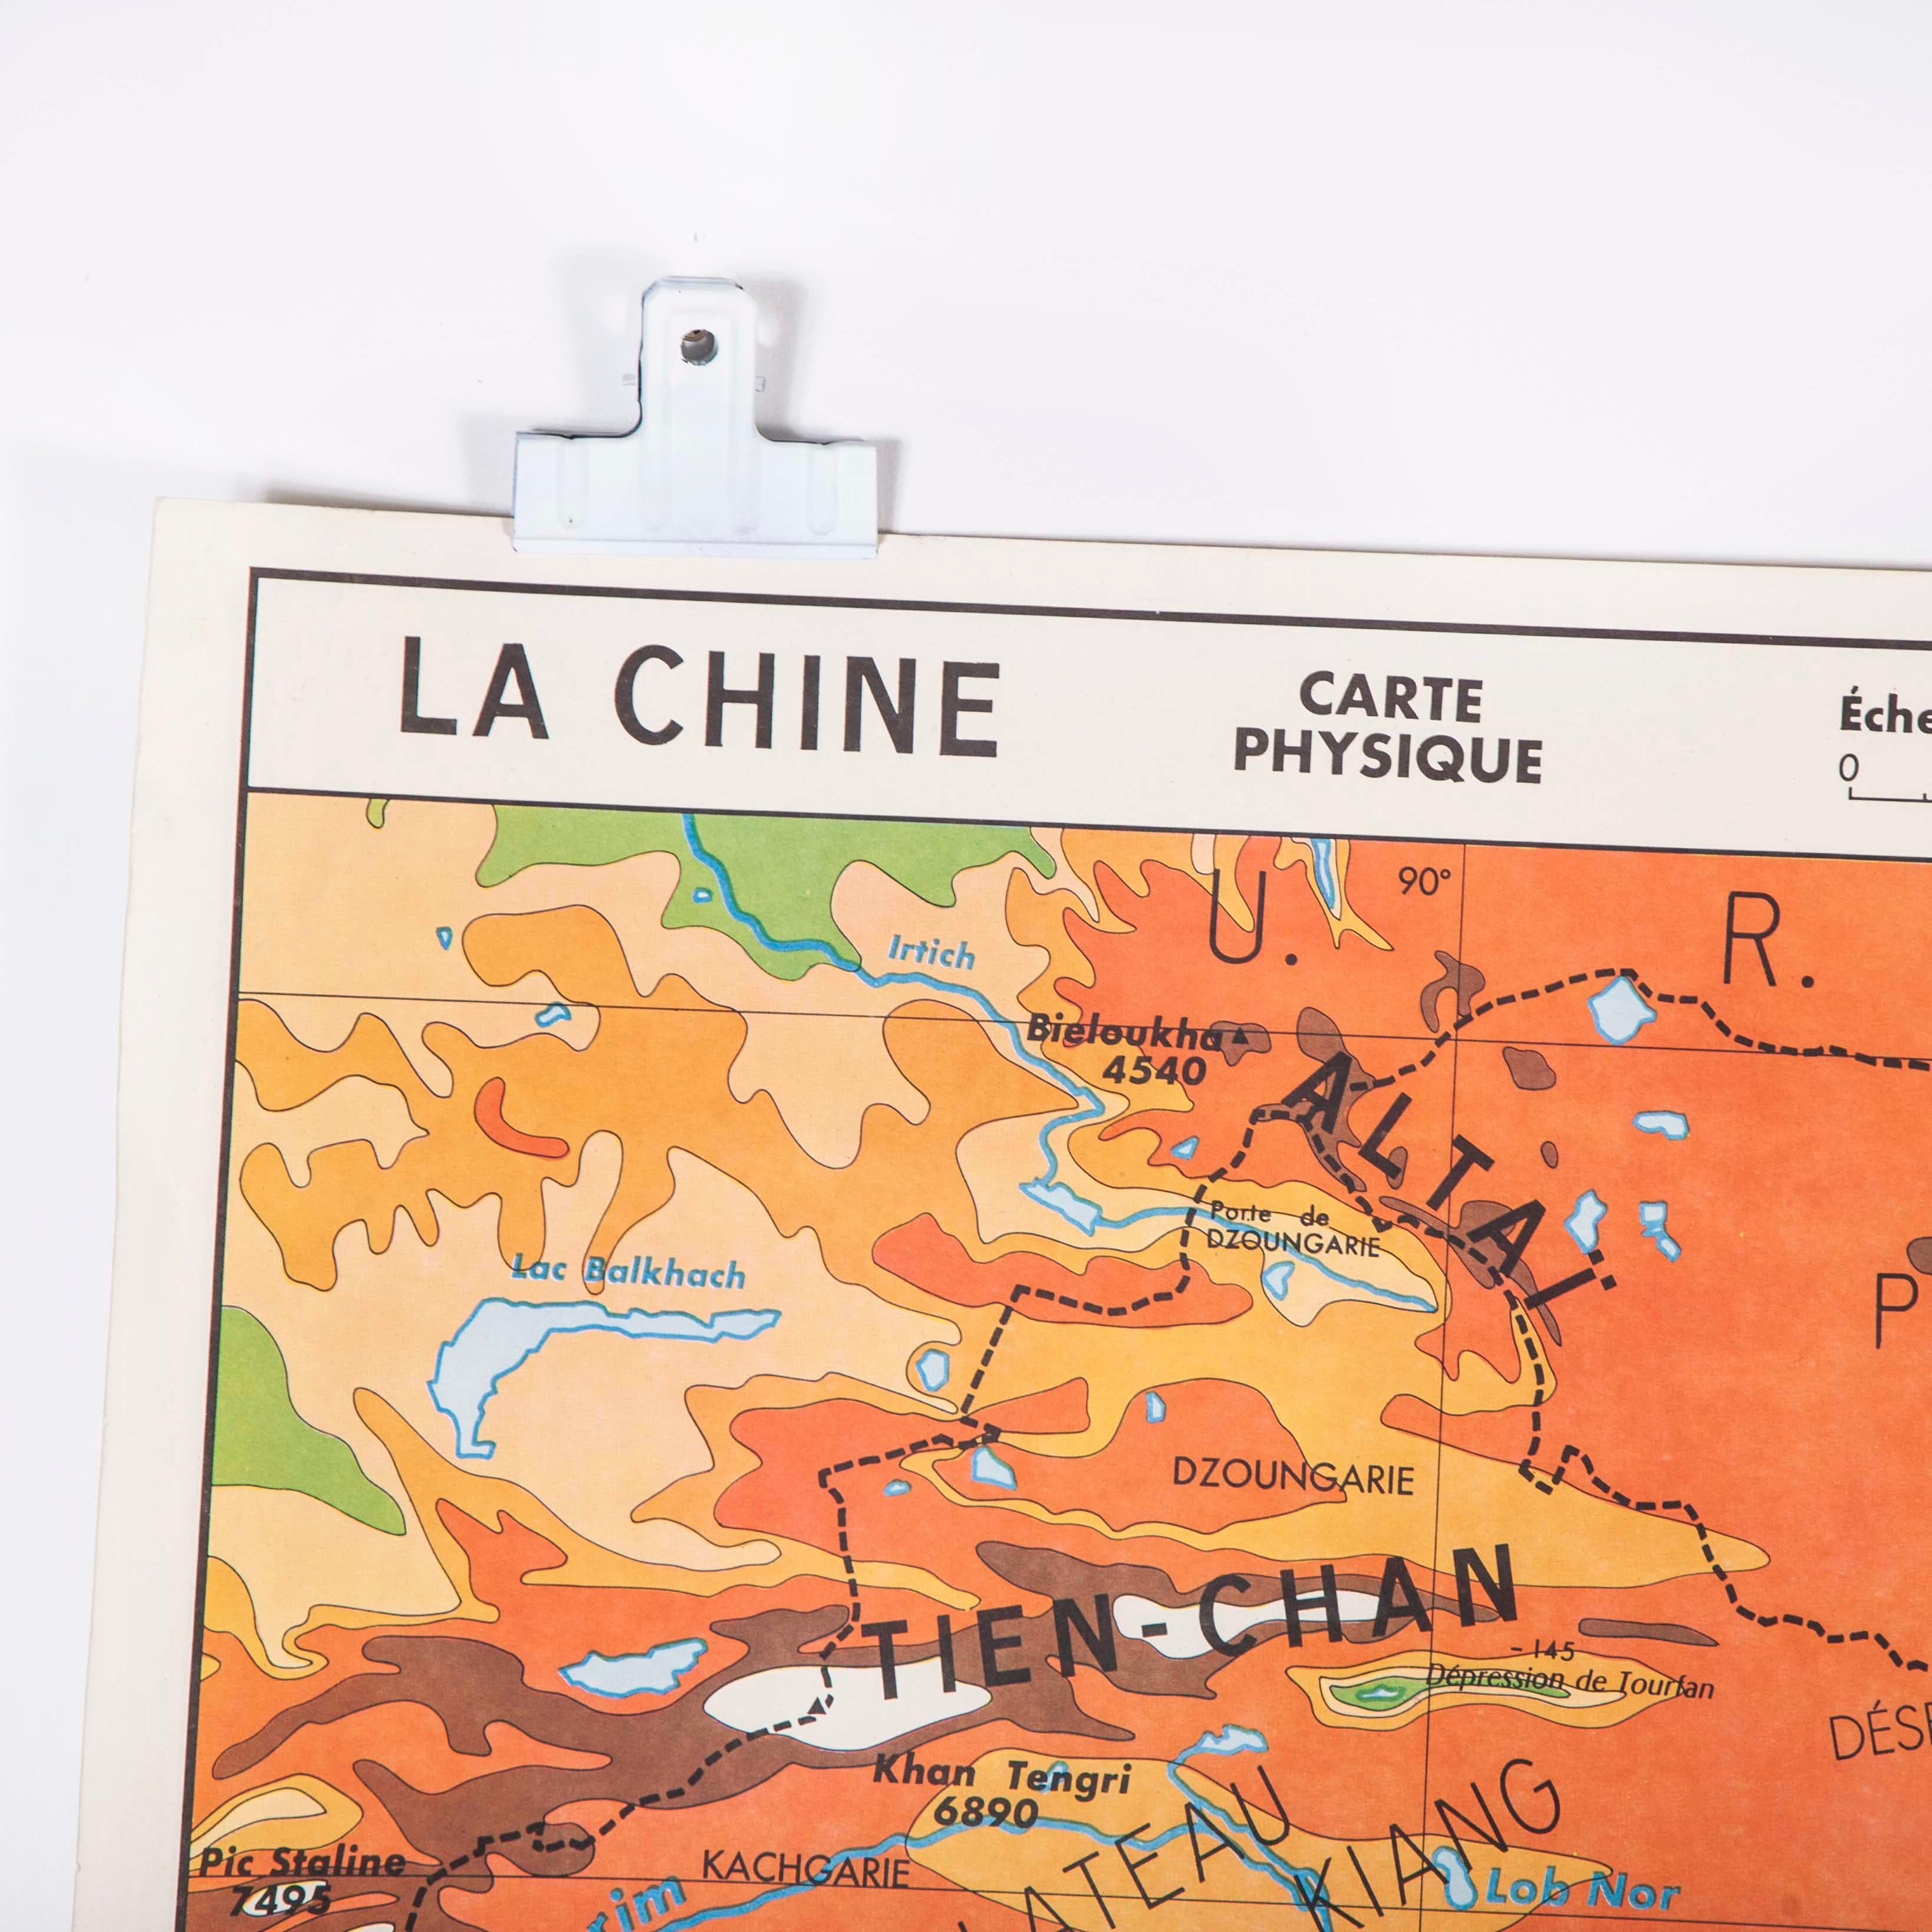 French double sided Educational School Poster of the Geography of China and Population of UK

French double sided Educational School Posters produced by La Maison des Instituteurs Saint Germain en Laye Paris. Heavy grade paper, excellent